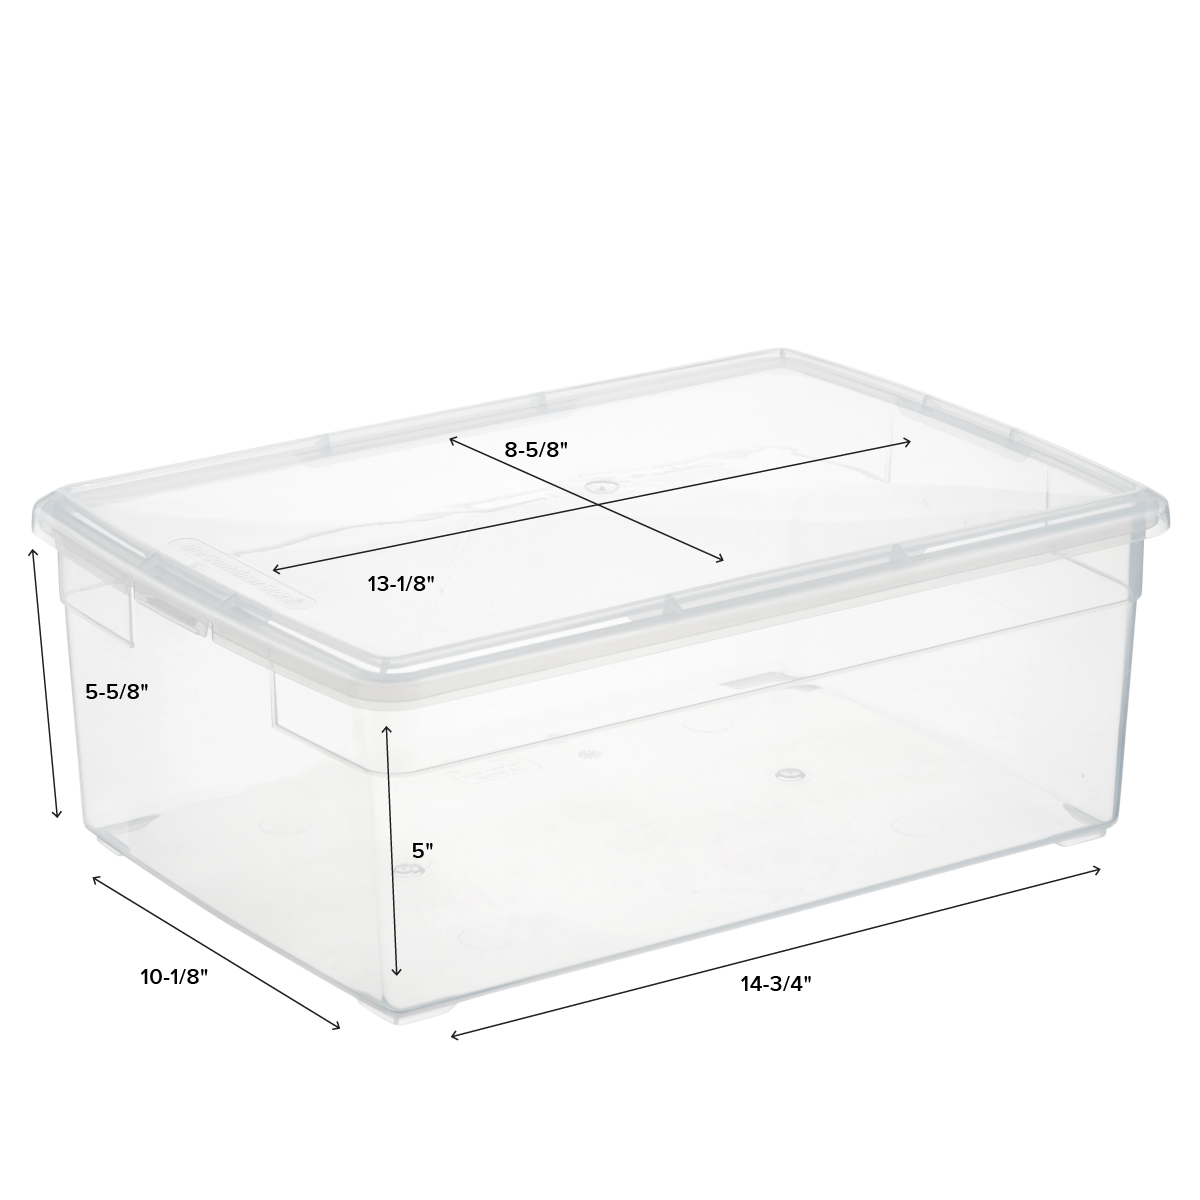 ALL SIZES STRONG OFFICE PACK OF 5 HOME QUALITY PLASTIC STORAGE BOXES 